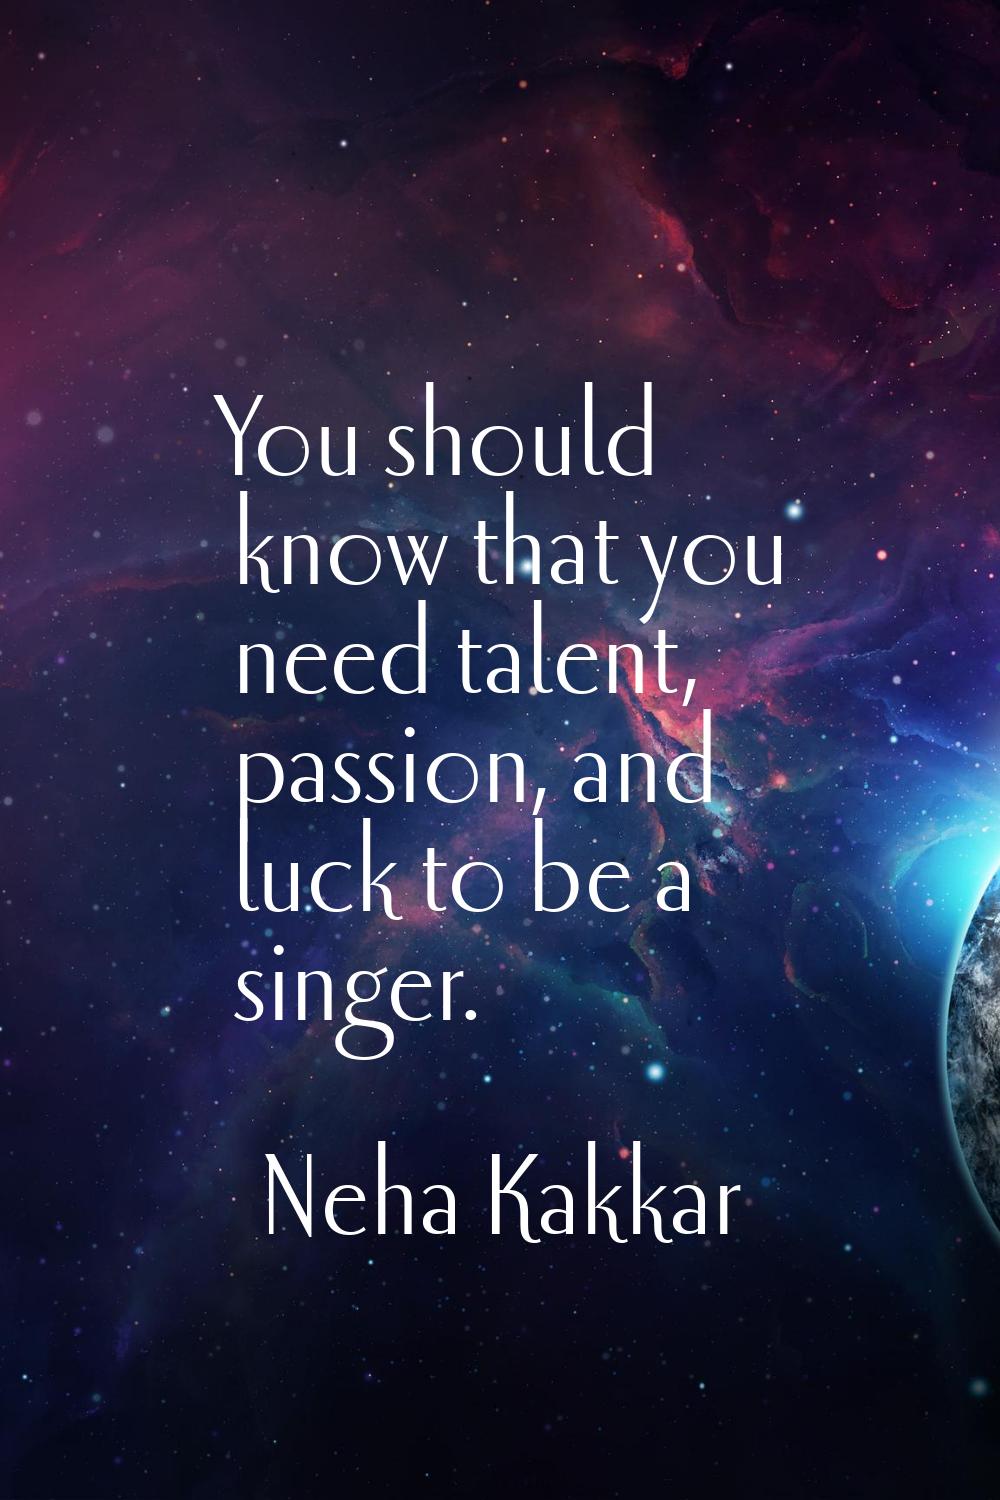 You should know that you need talent, passion, and luck to be a singer.